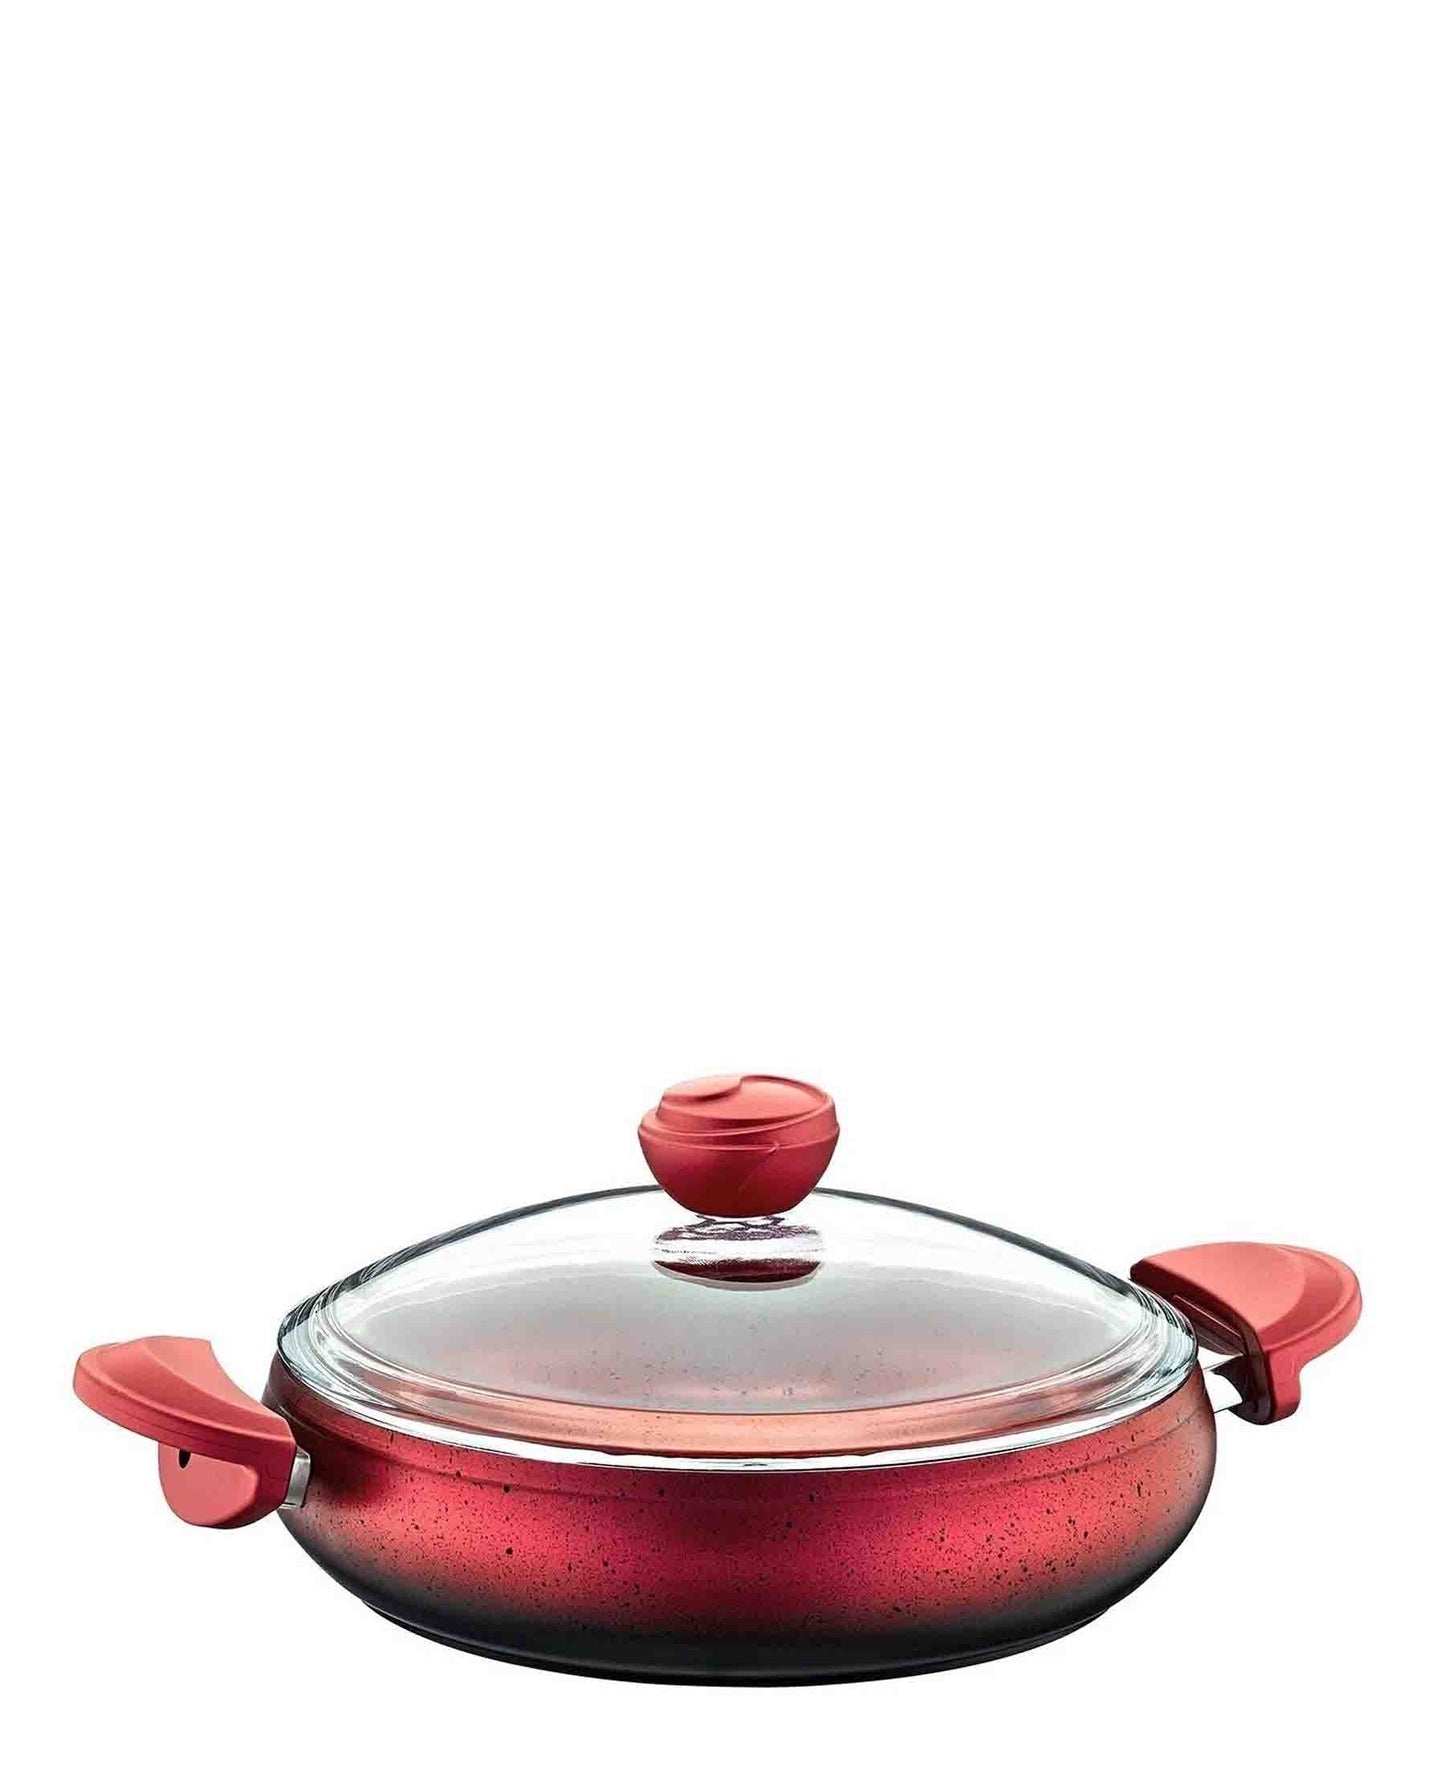 OMS Belly Shaped Pot 20cm - Red